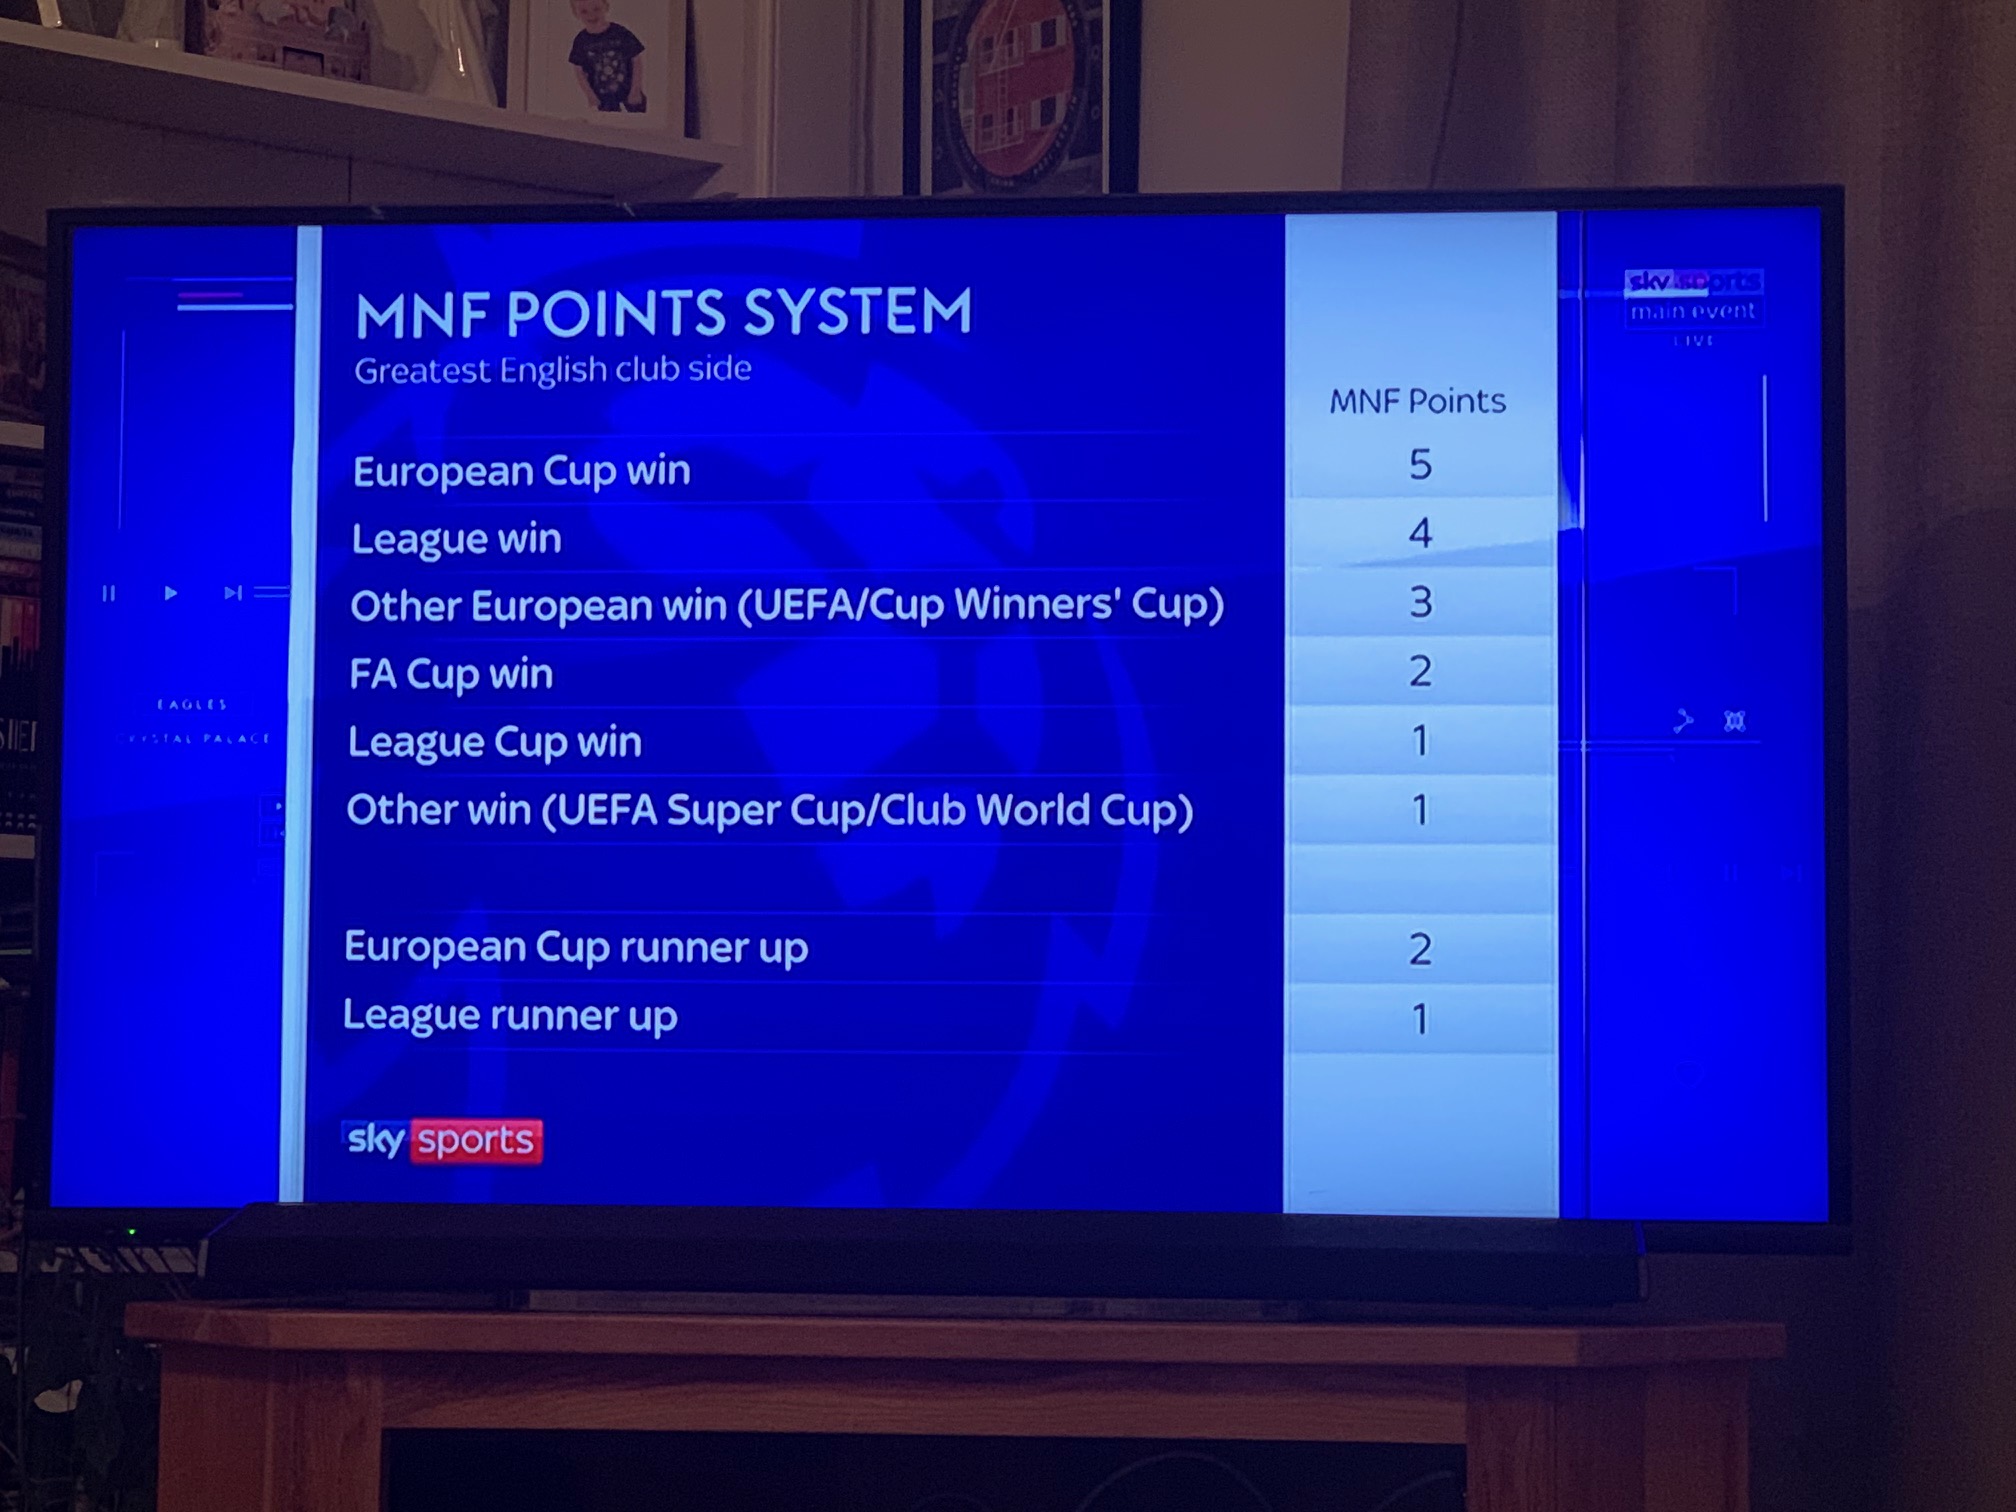 euro cups and league wins get the highest scores